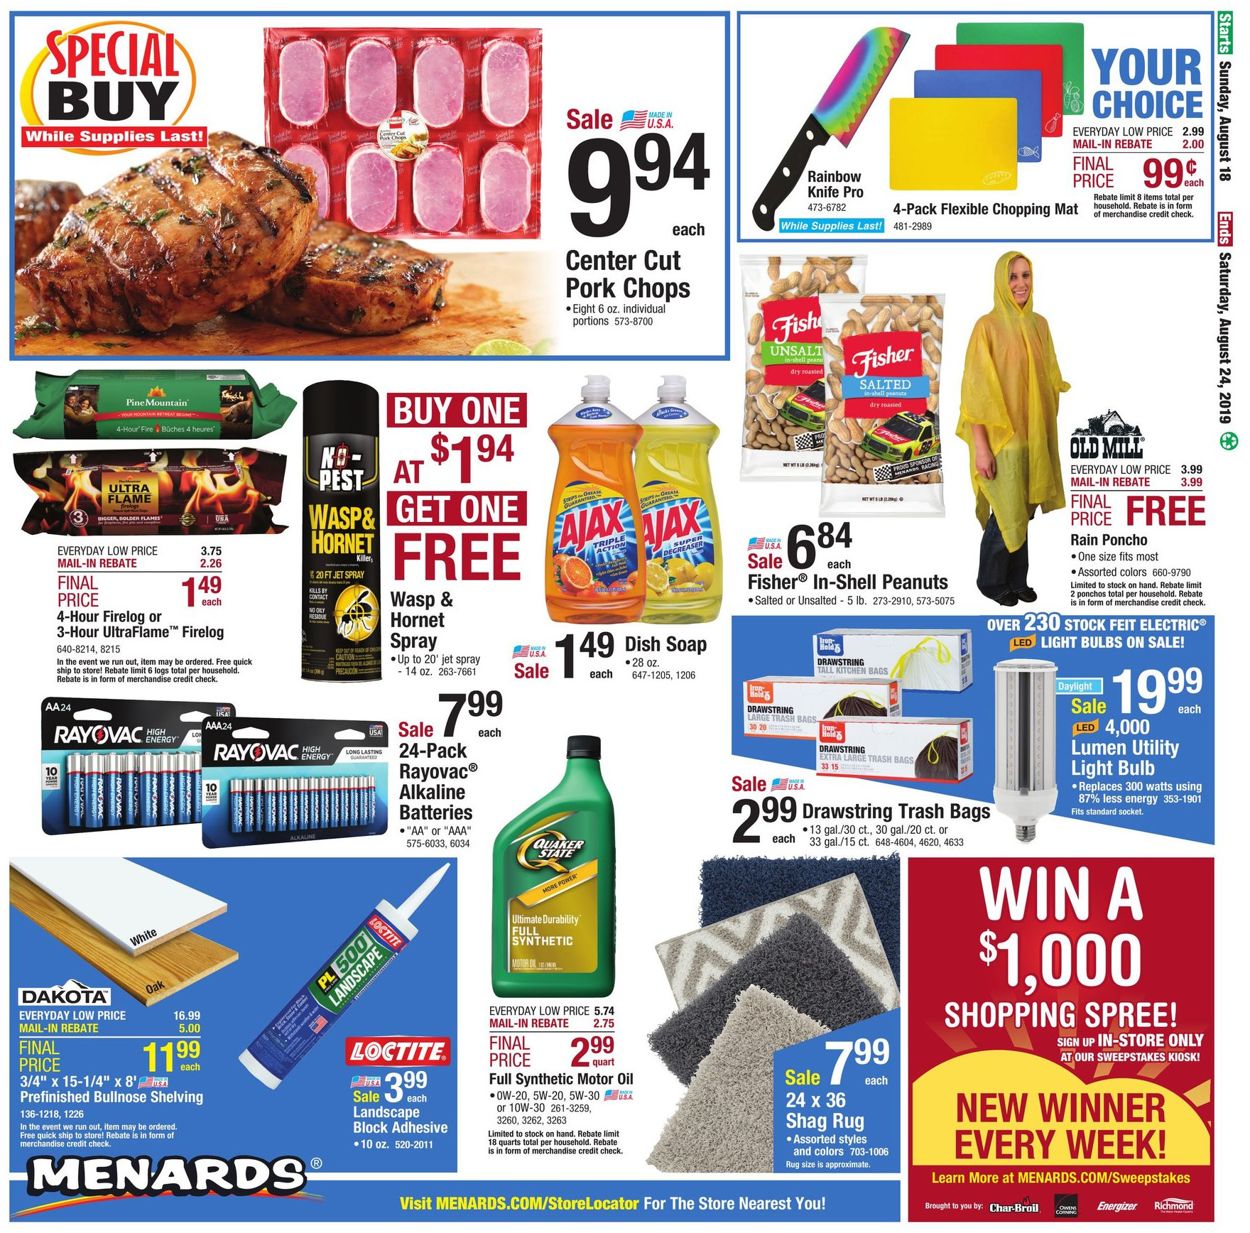 Menards Current weekly ad 08/18 - 08/24/2019 [33] - 0